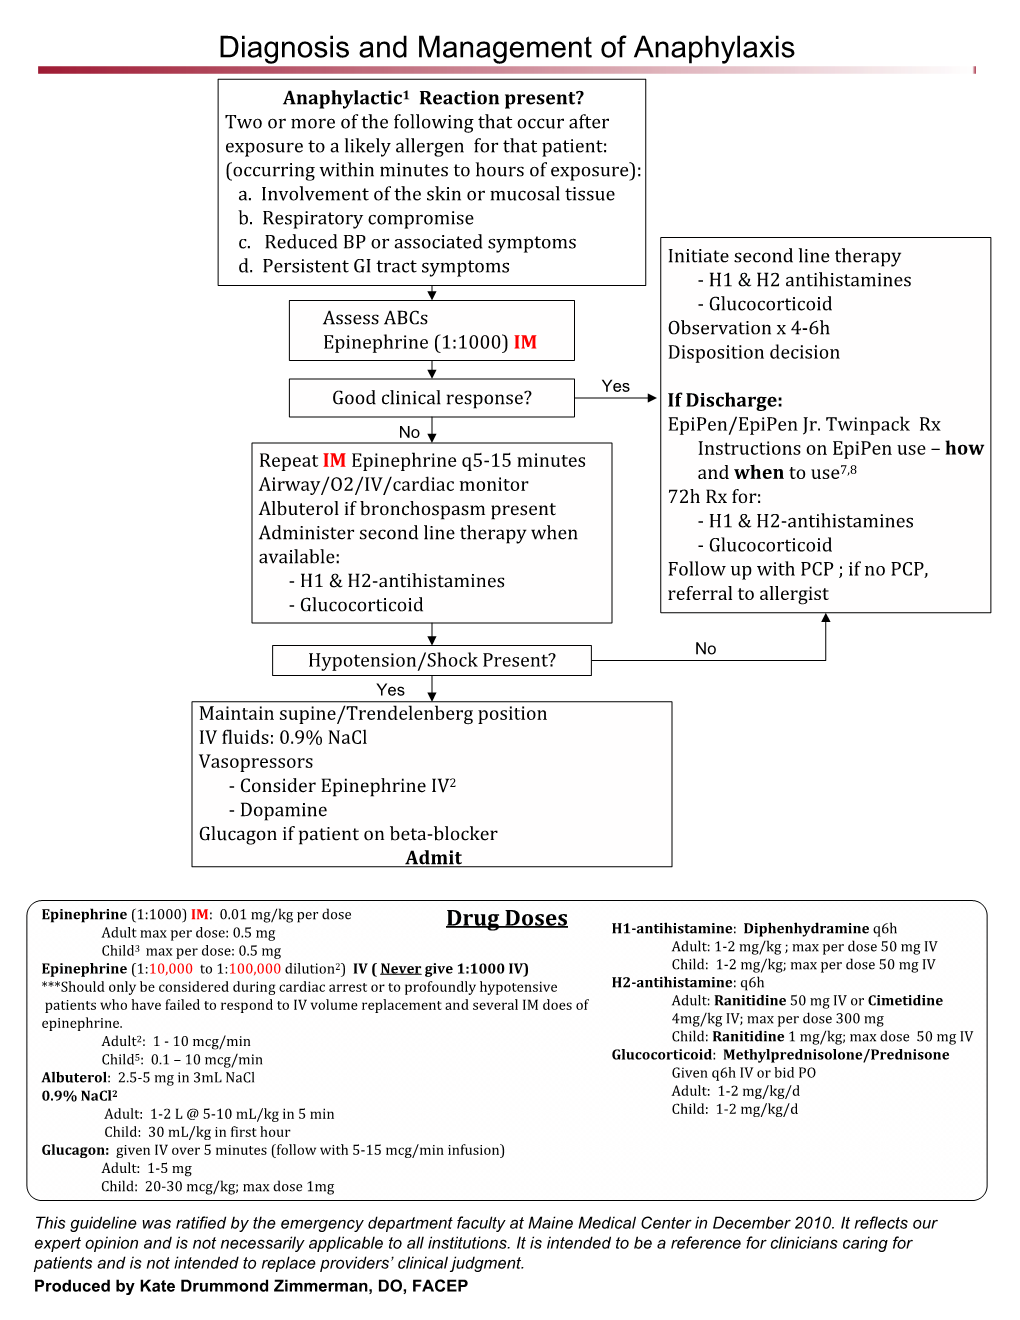 Diagnosis And Management Of Anaphylaxis Docslib